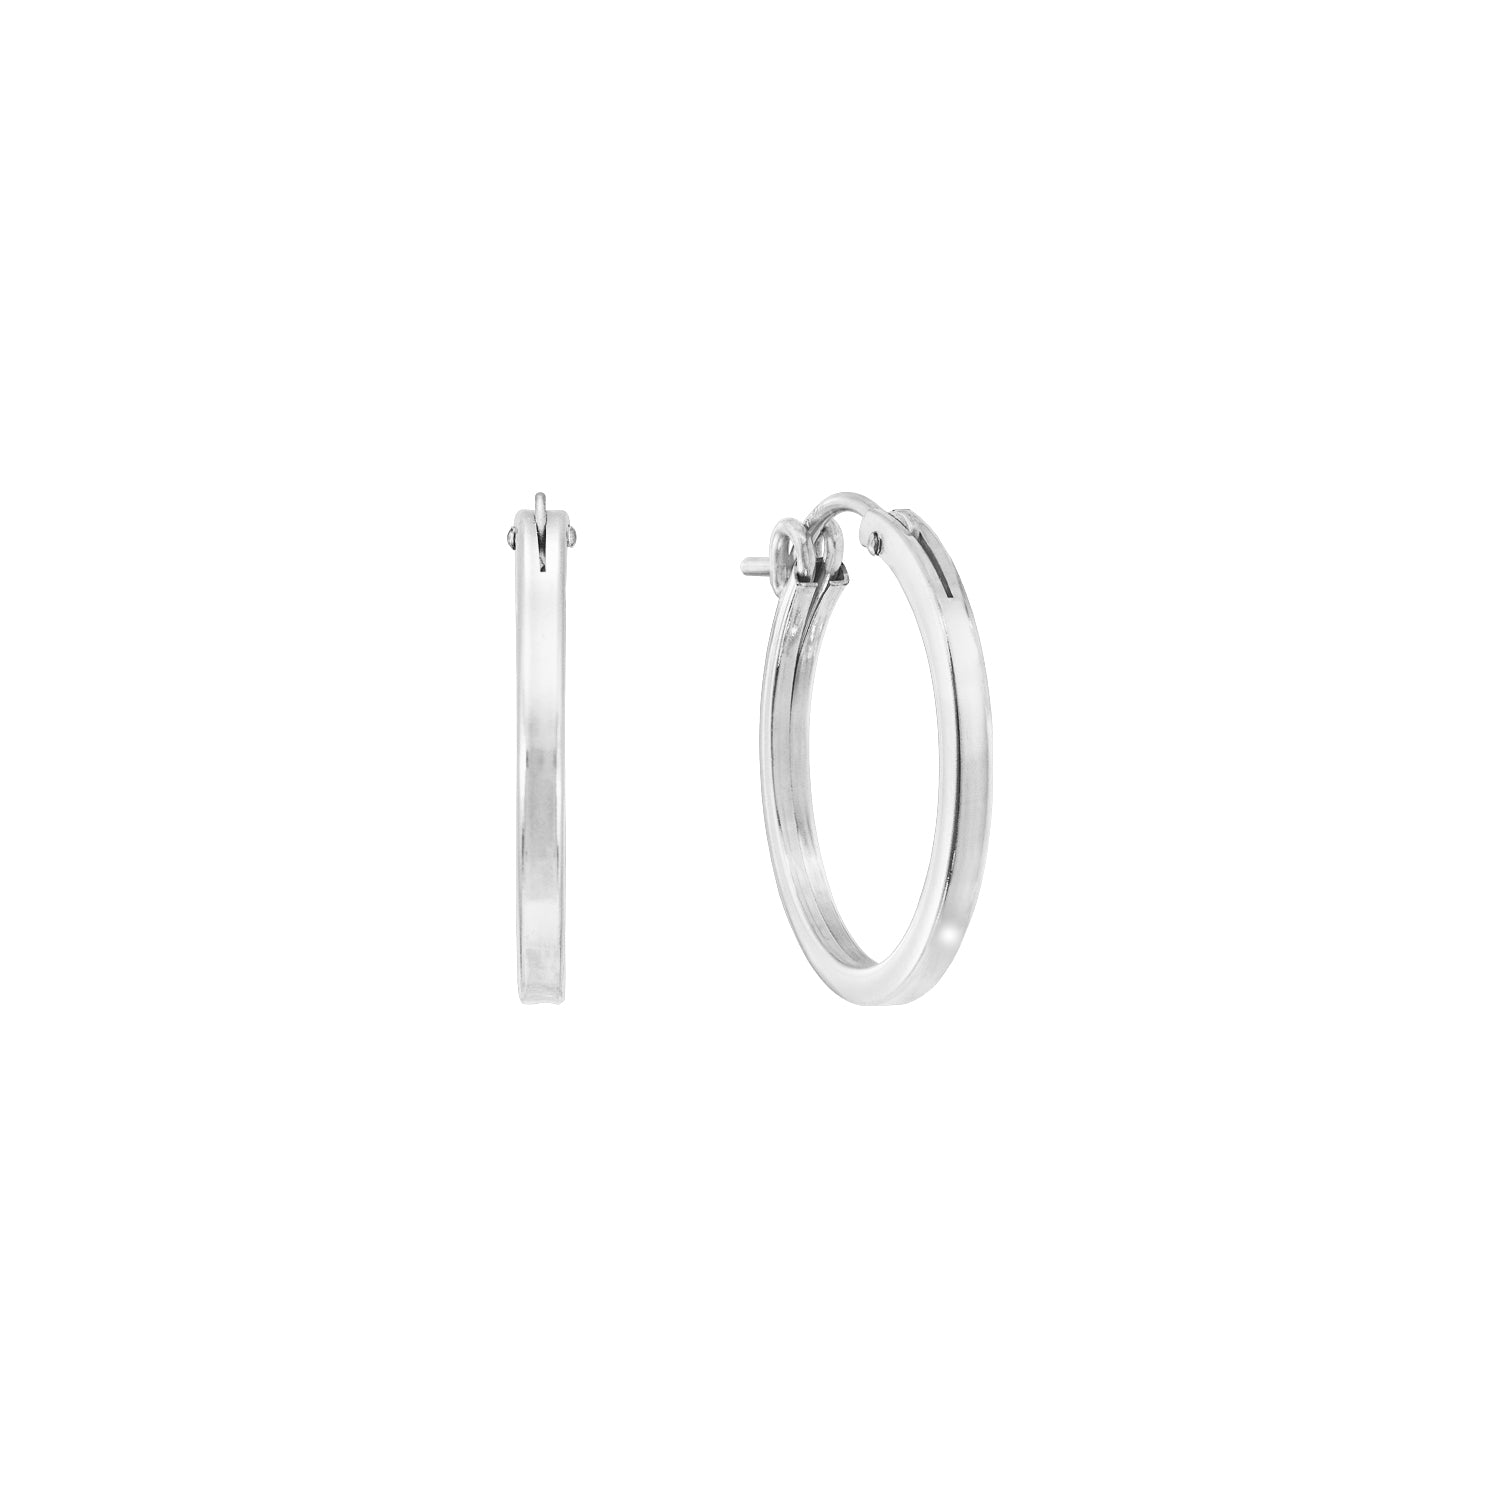 J&CO Jewellery Small Square Edged Hoop Earrings Silver